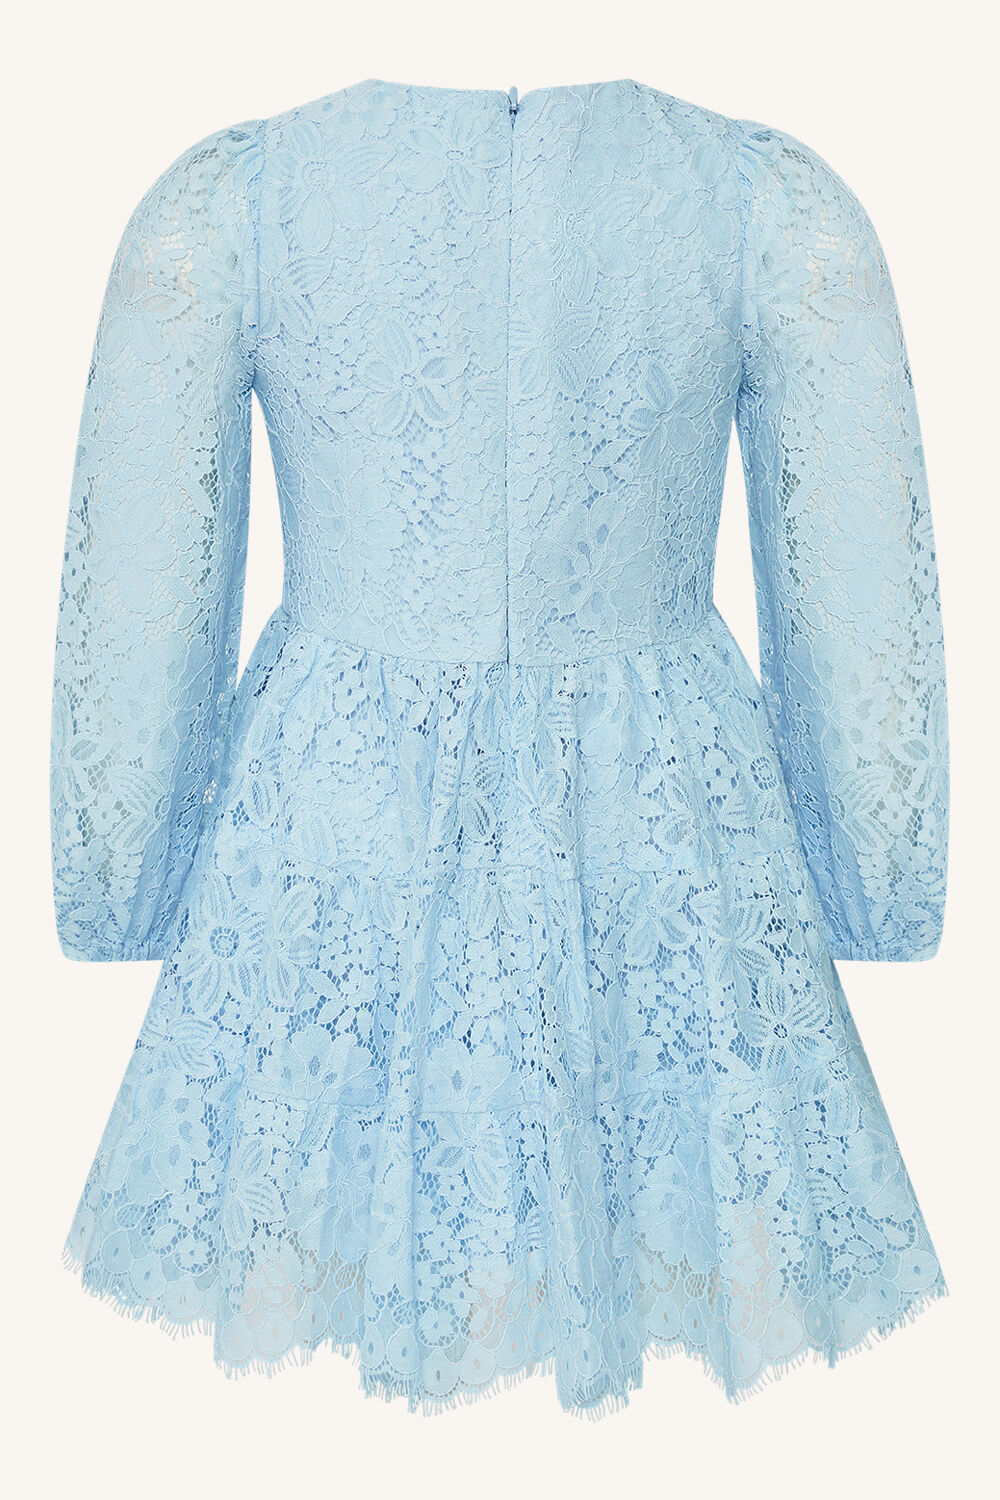 GIRLS SIENNA TIERED LACE DRESS in colour CROWN BLUE